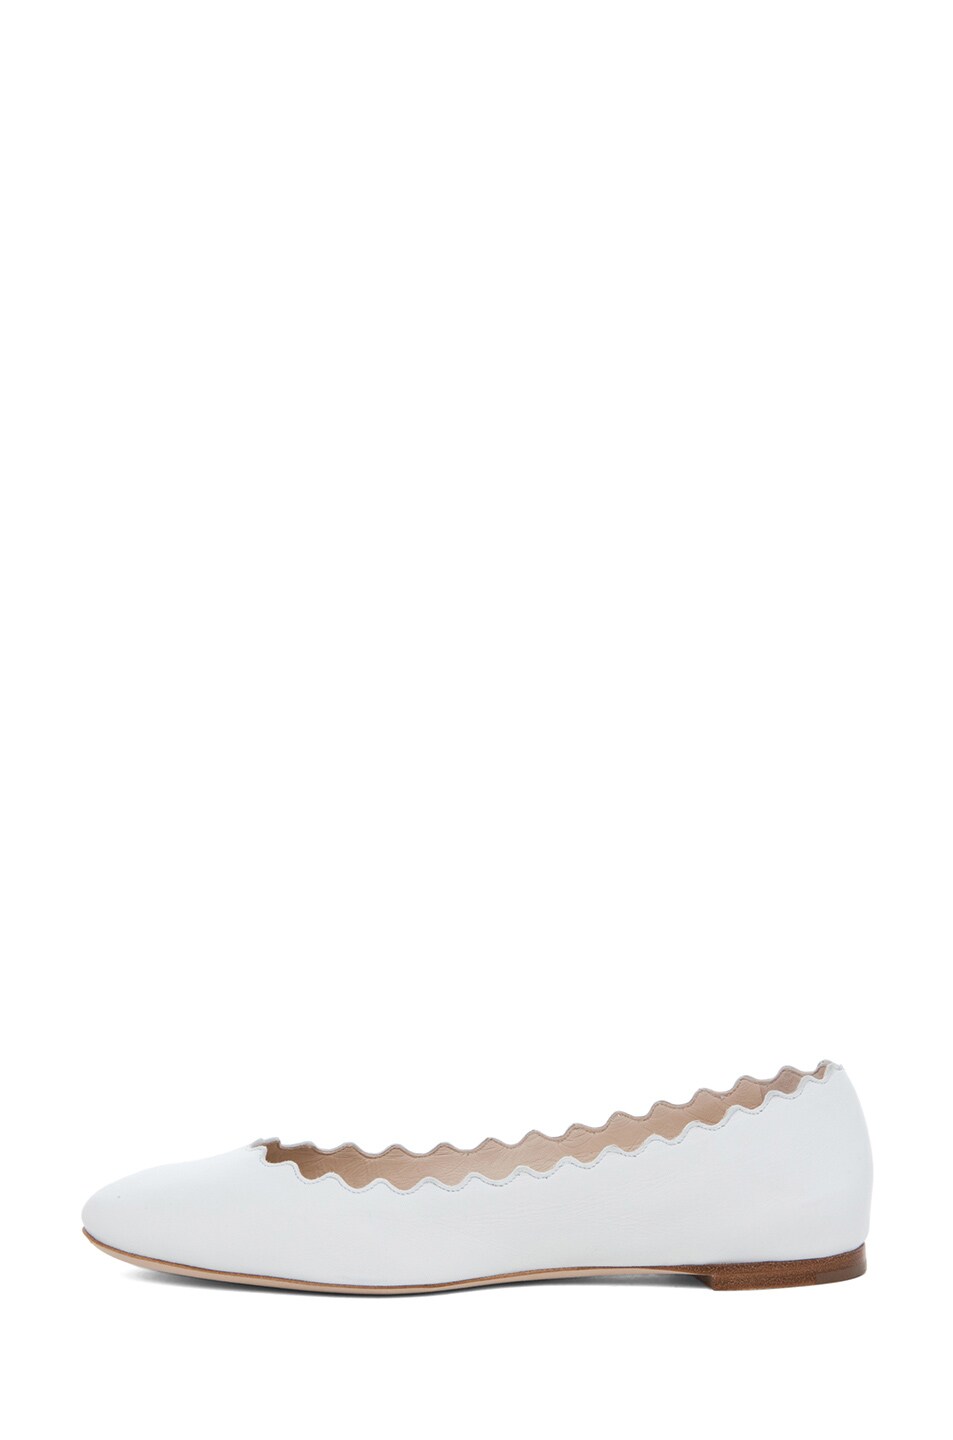 Image 1 of Chloe Leather Scallop Ballerina Flat in White